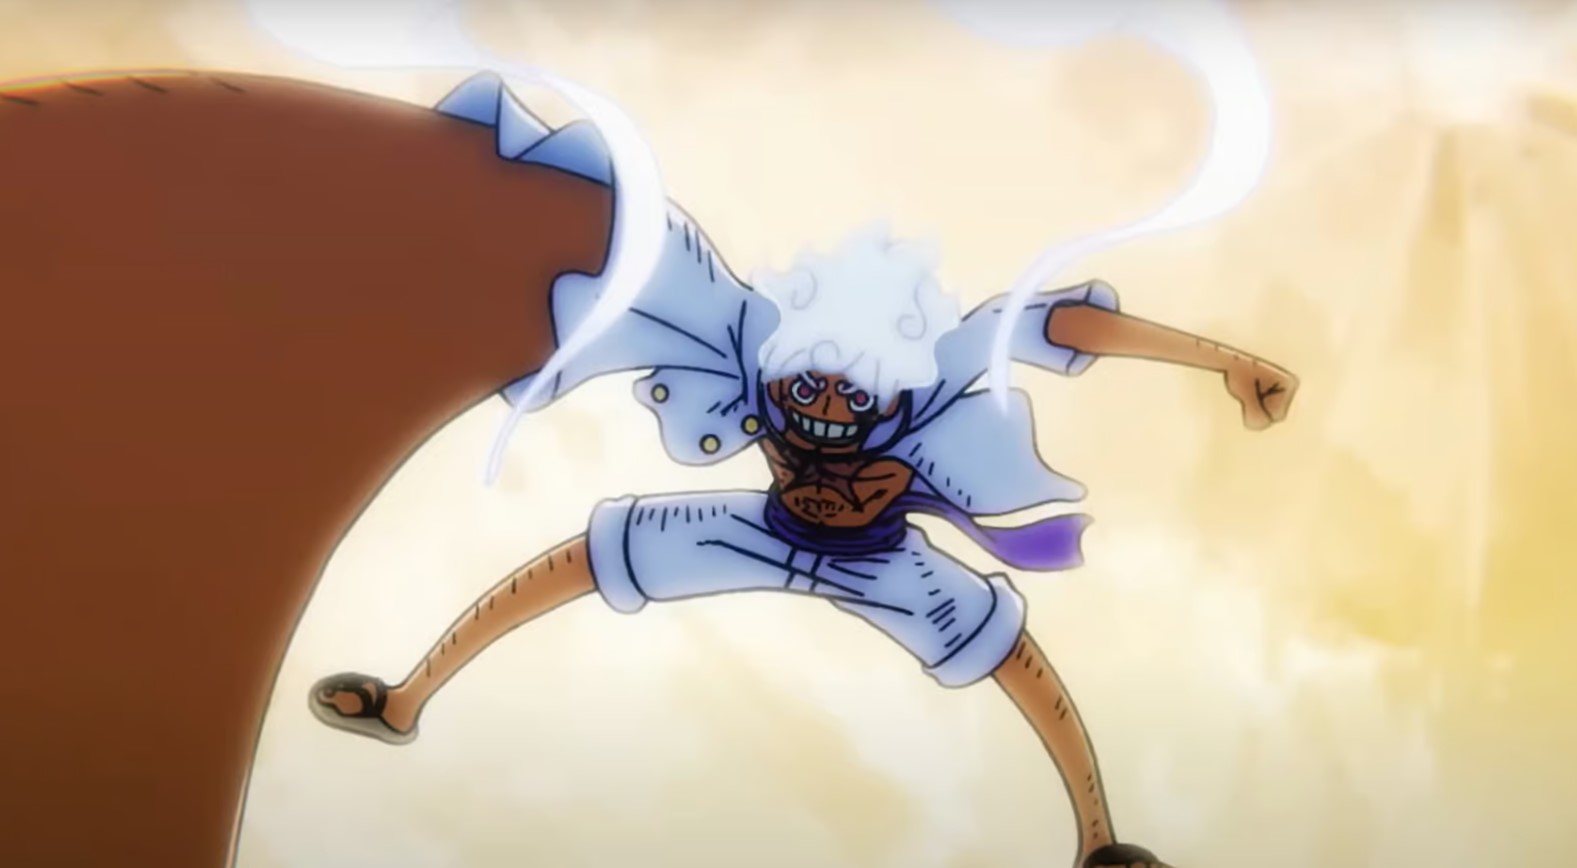 One Piece Tops Luffy's Gear Fifth Debut With Incredible New Episode - IMDb